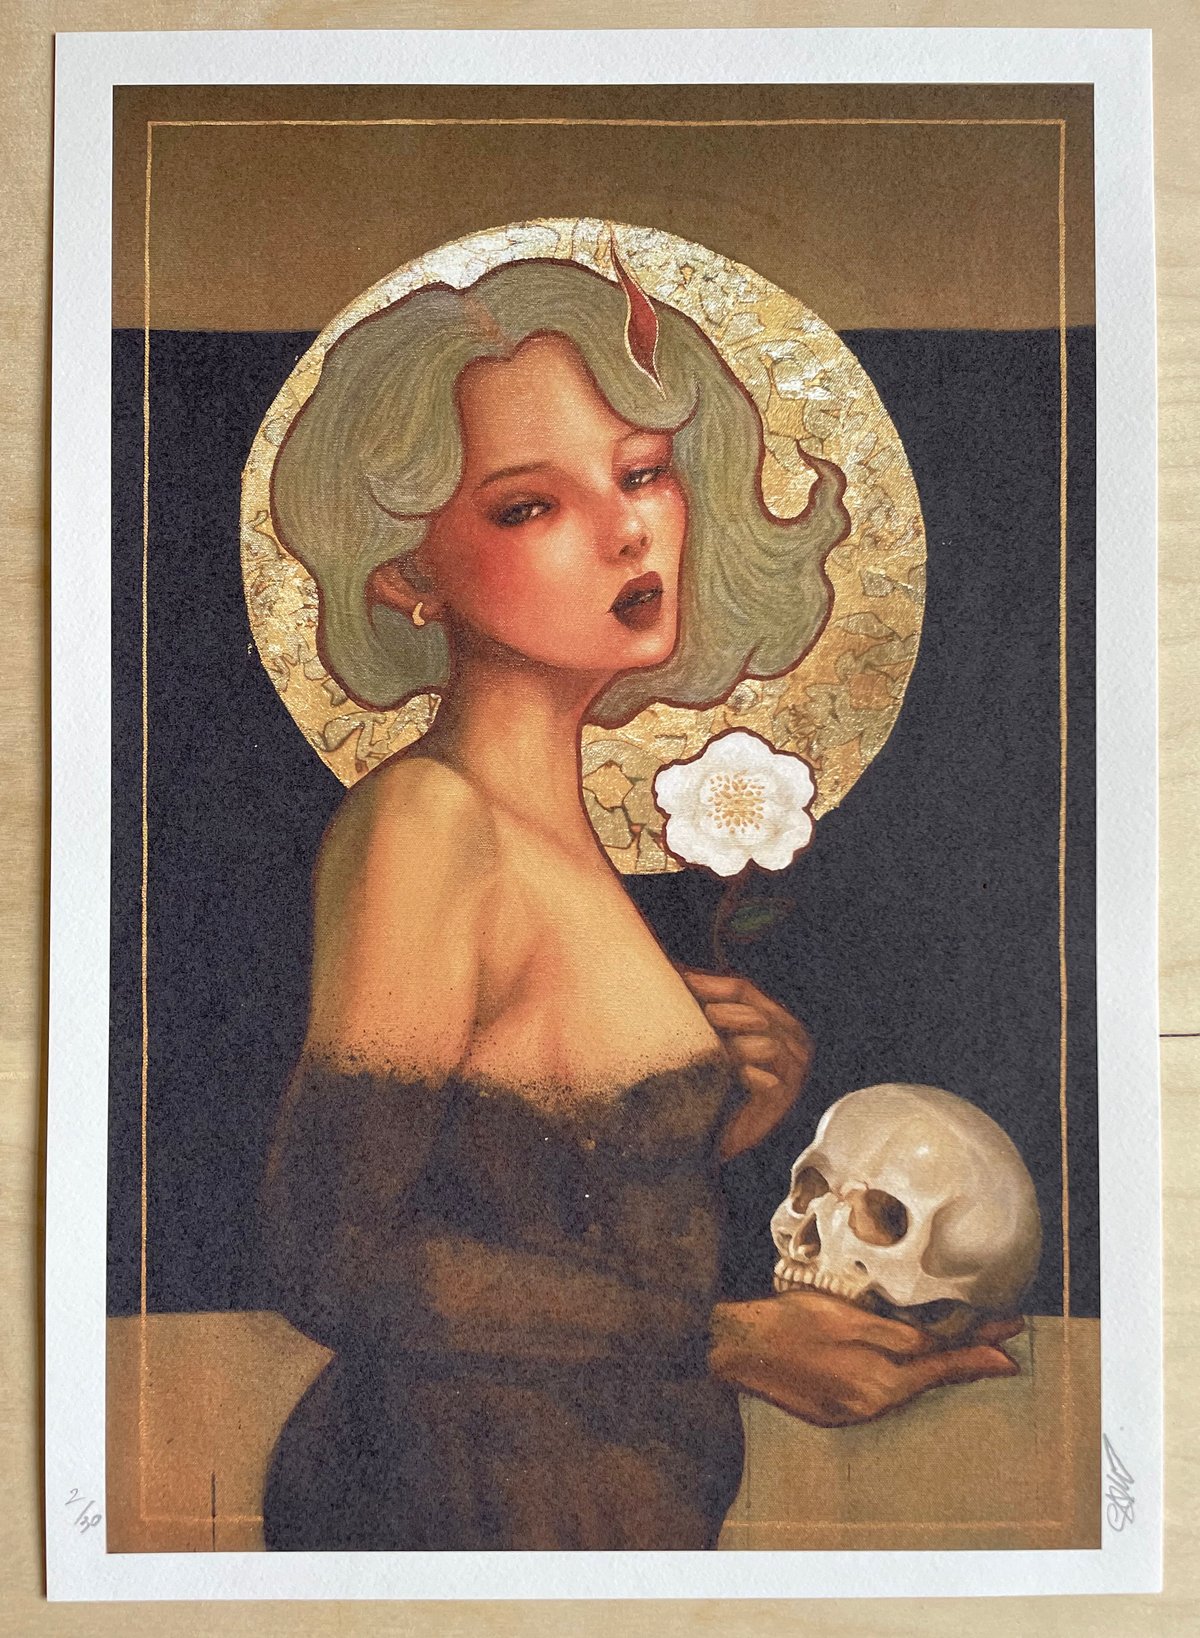 Image of Death Limited Edition A3 Prints